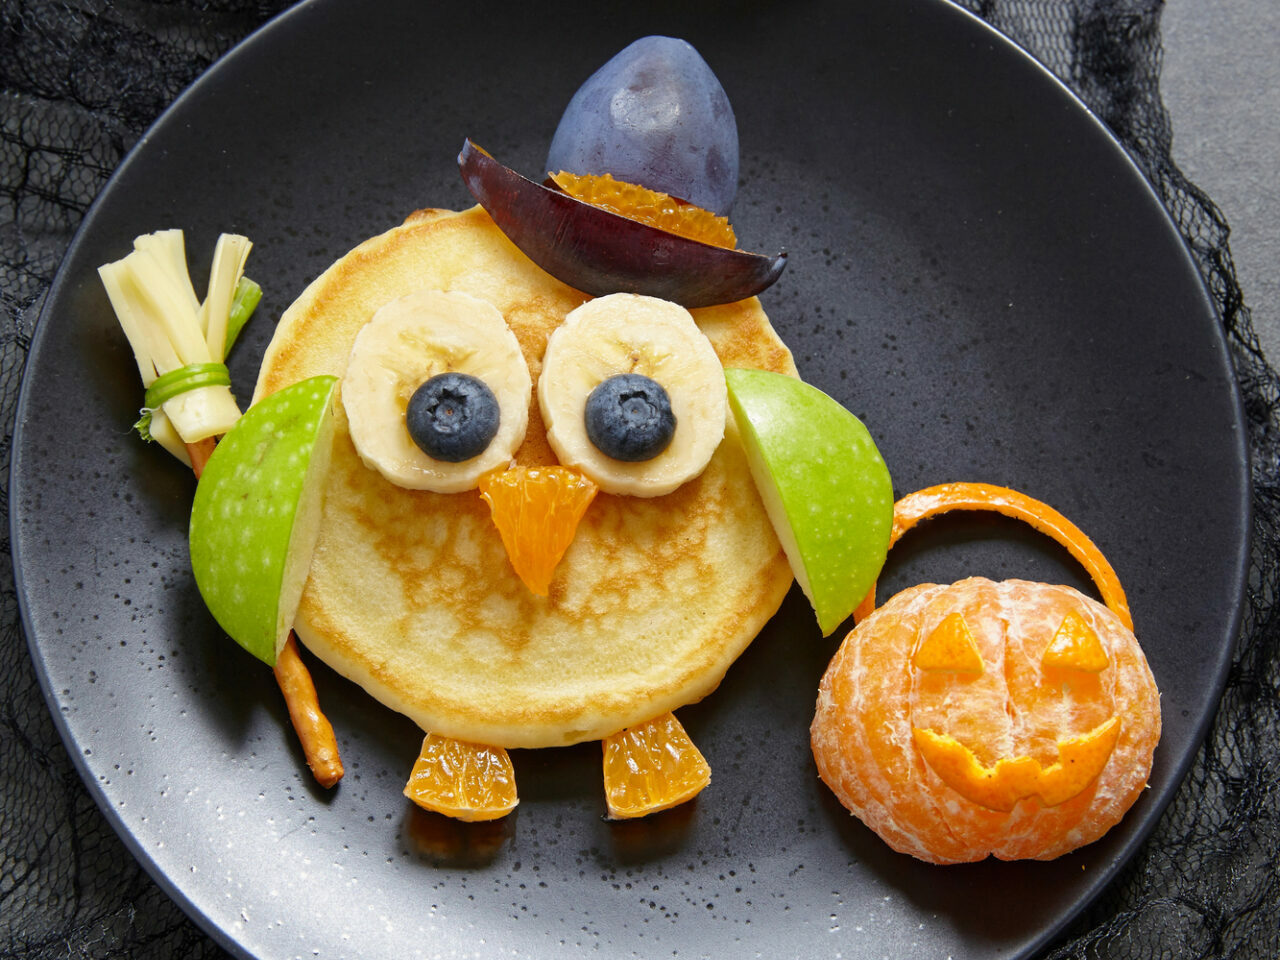 pancake made to look like an owl witch with fruit